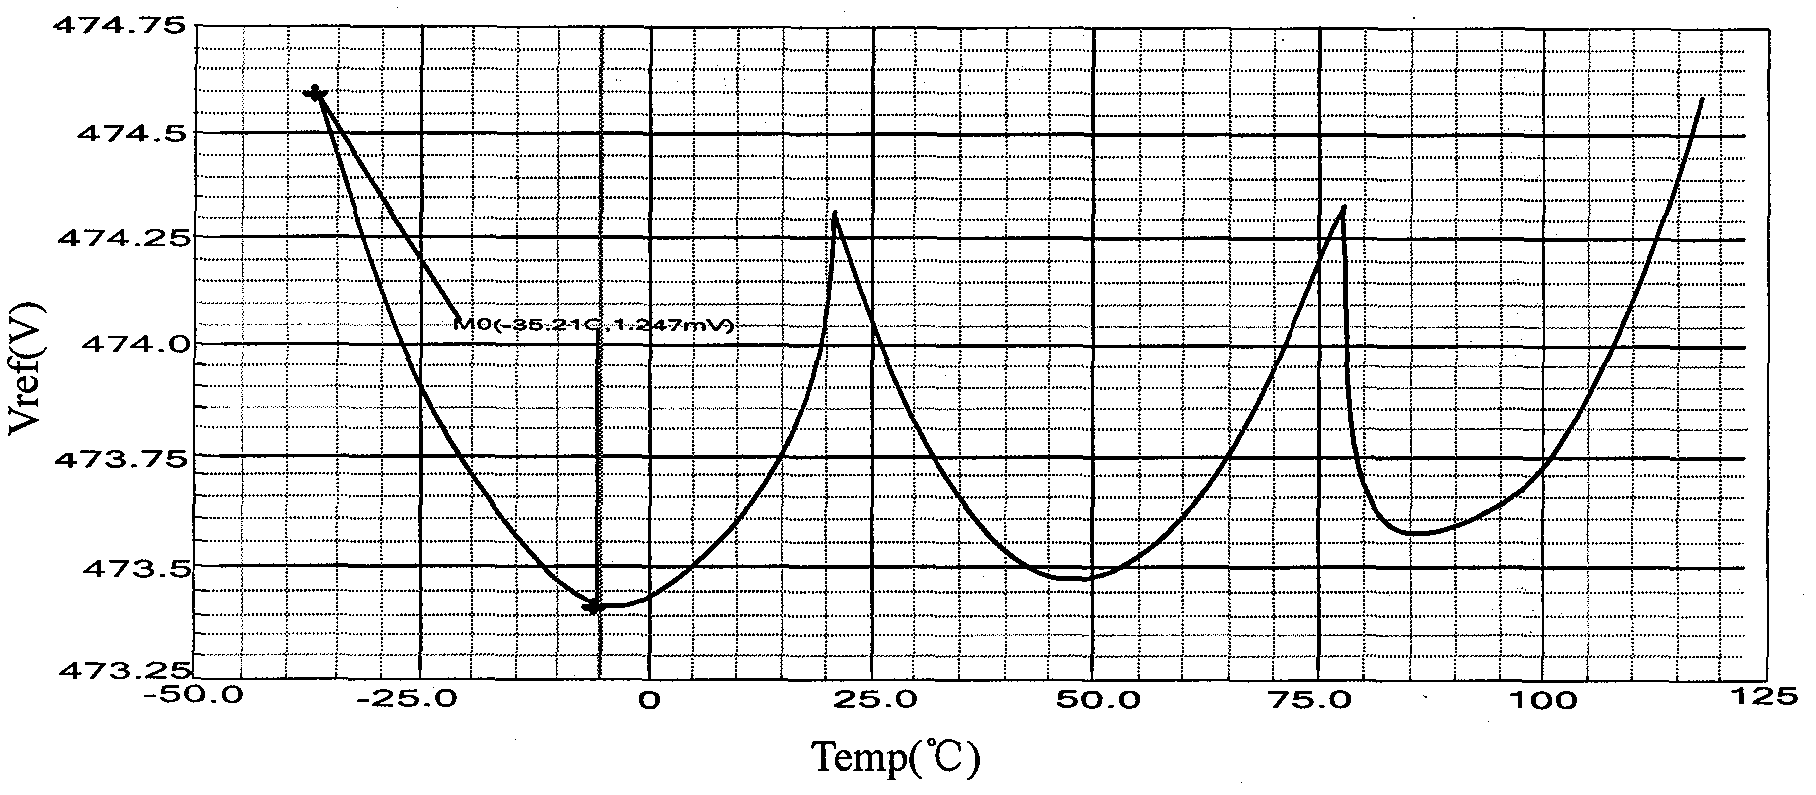 Complementary metal oxide semiconductor (CMOS) segmented high-order temperature compensated sub-threshold reference voltage source